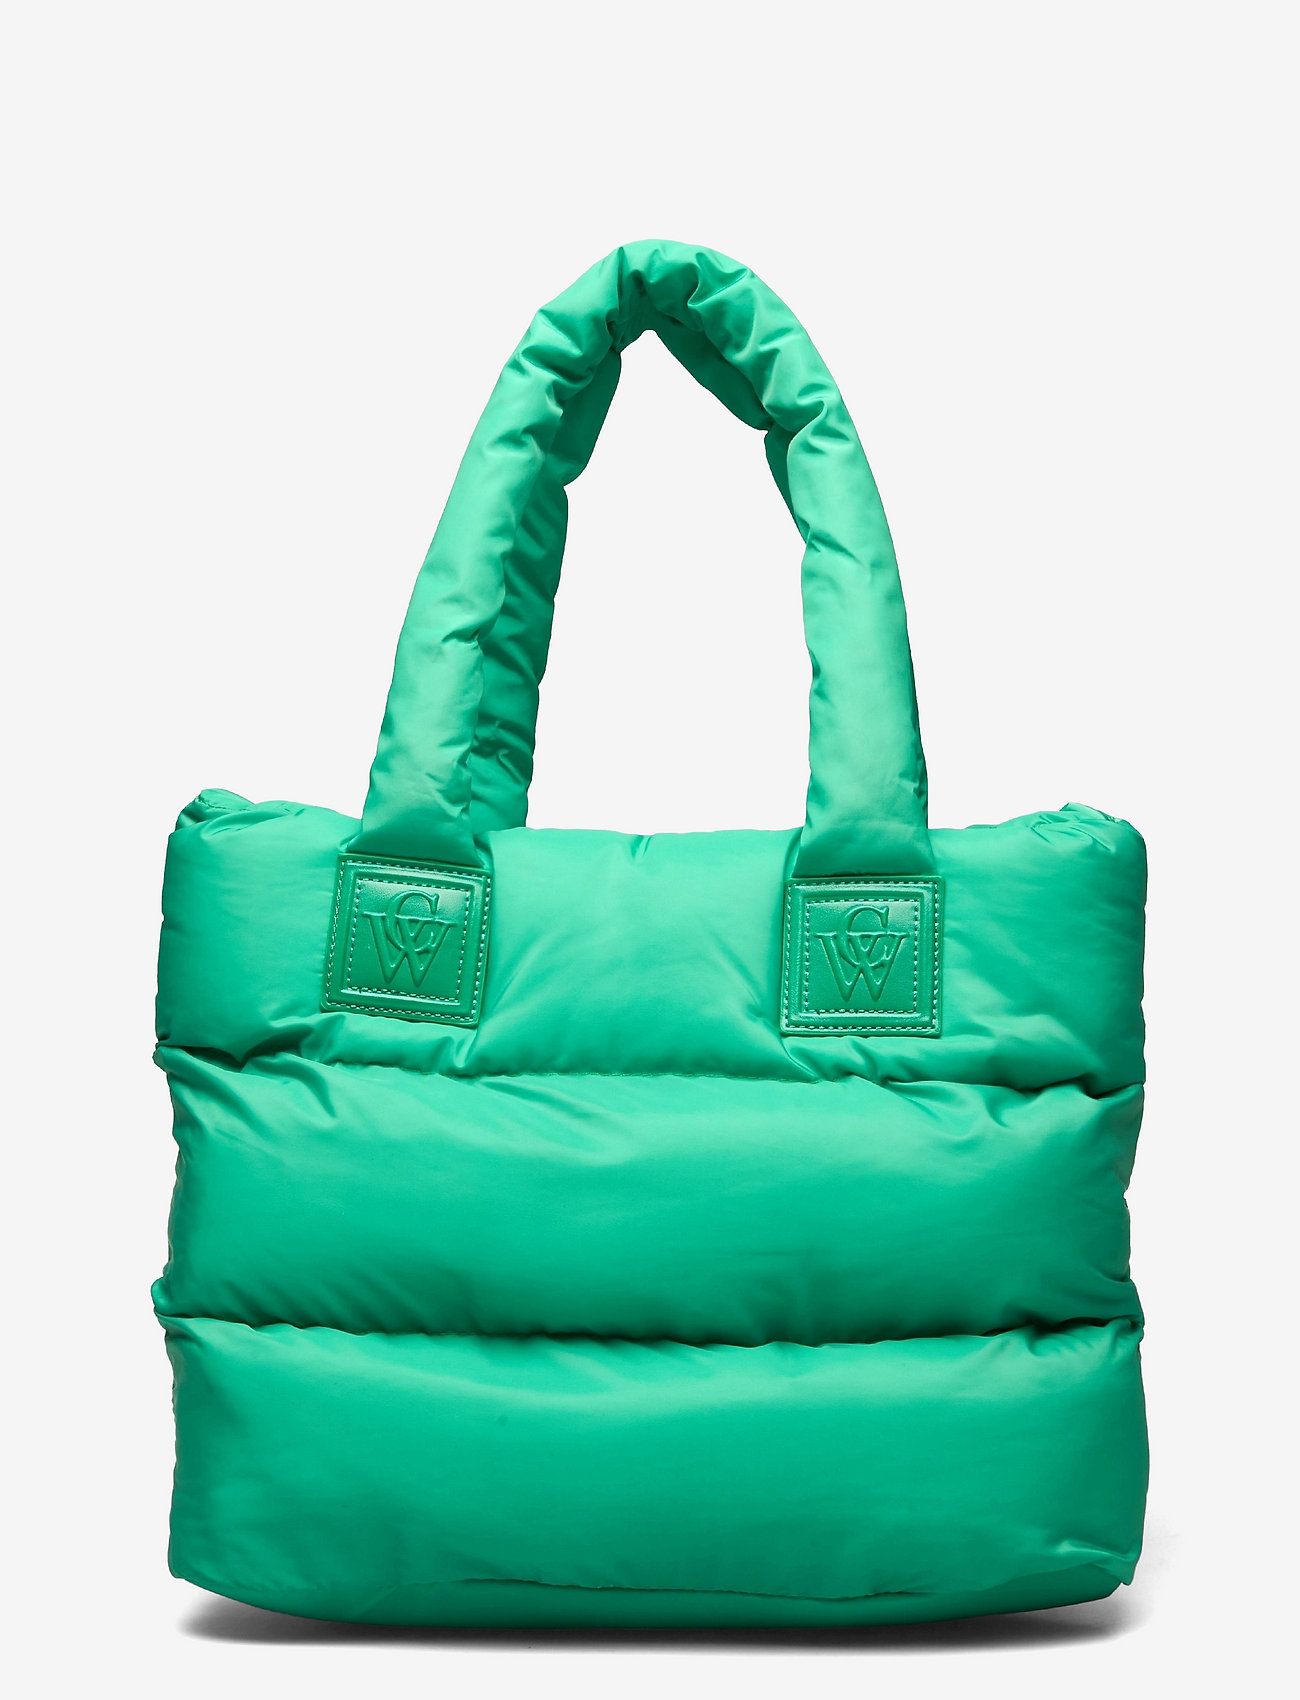 Carin Wester Morgan - Shoppers & Tote Bags | Boozt.com